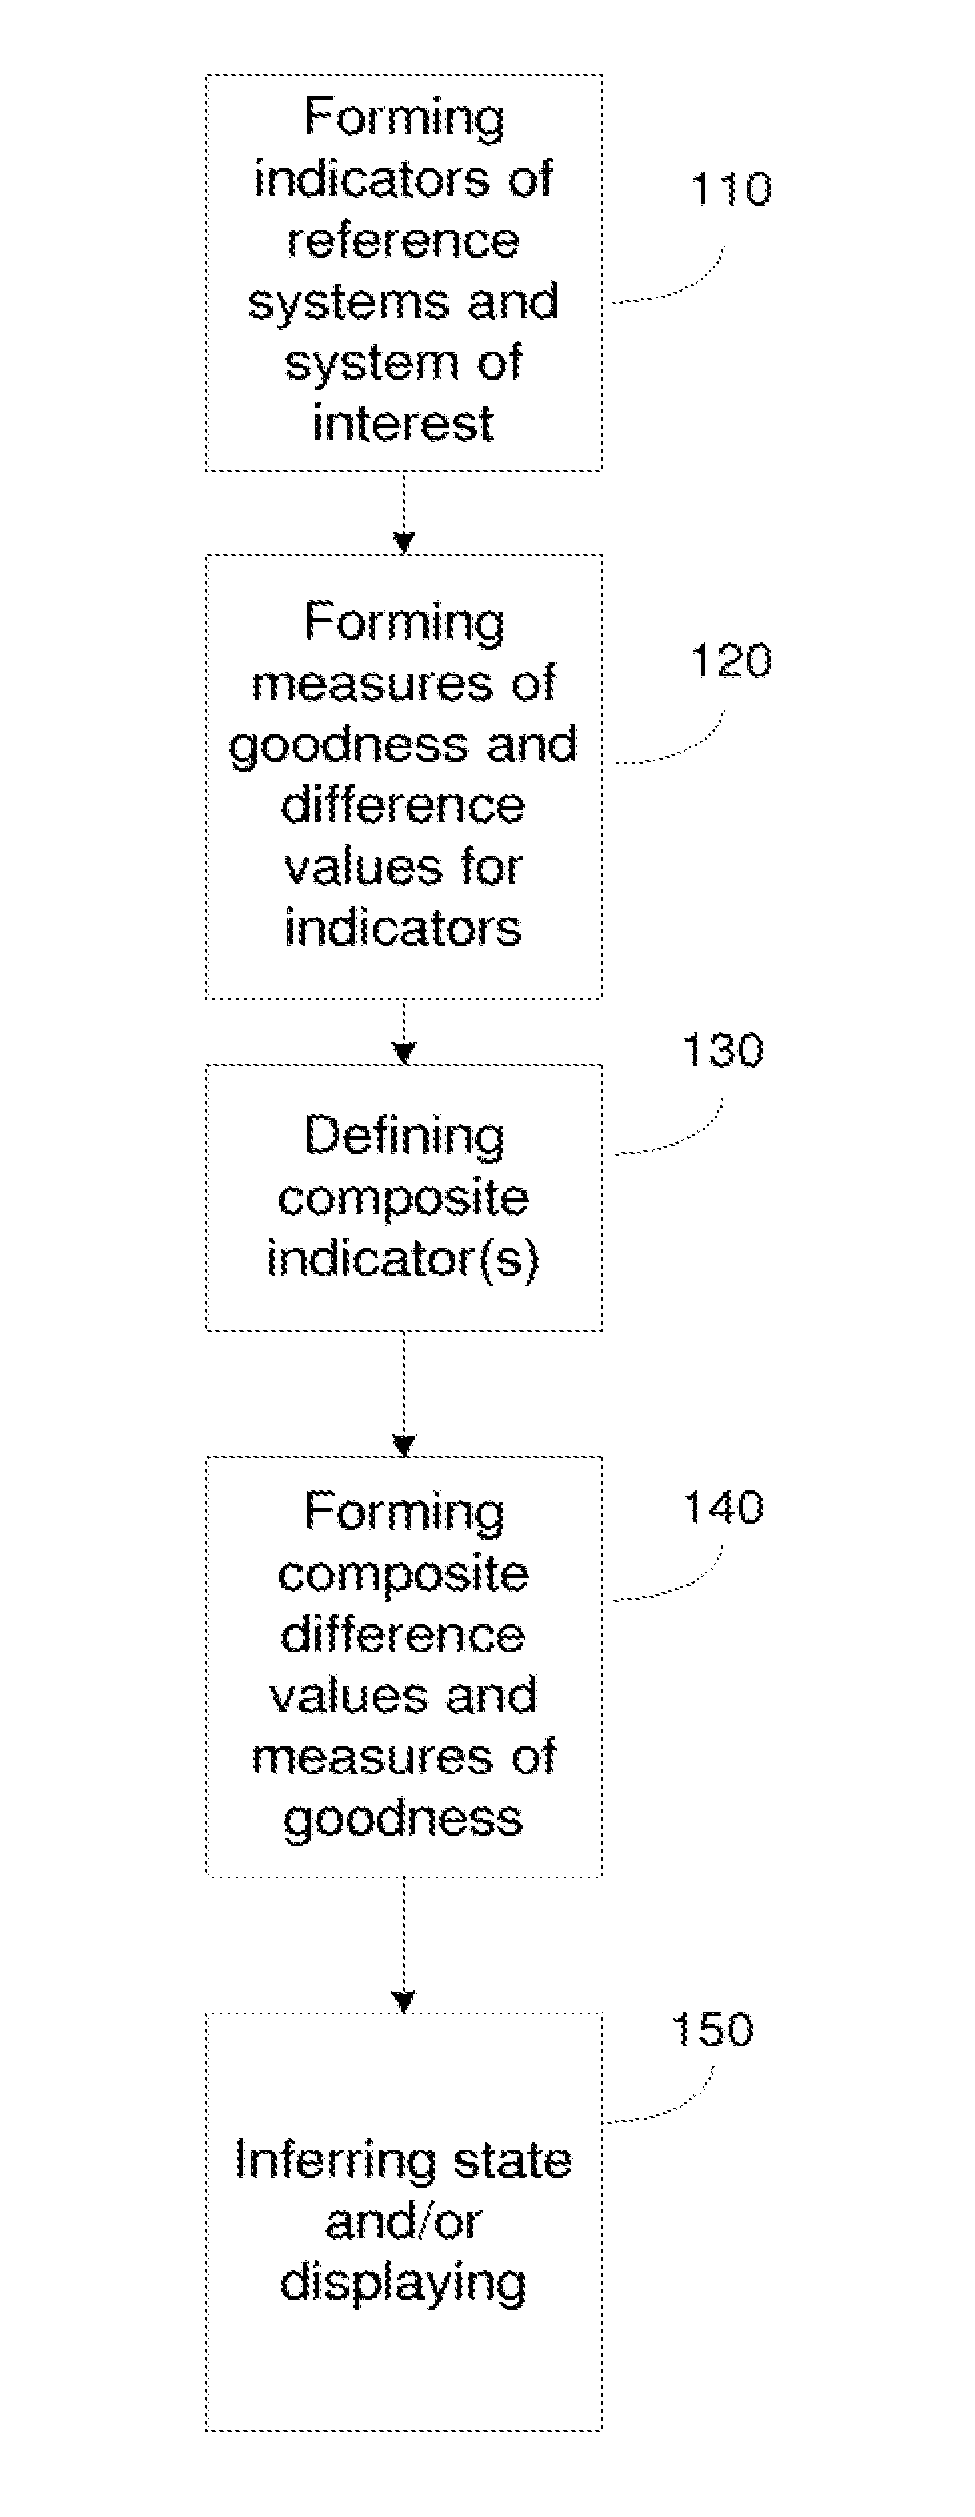 State inference in a heterogeneous system